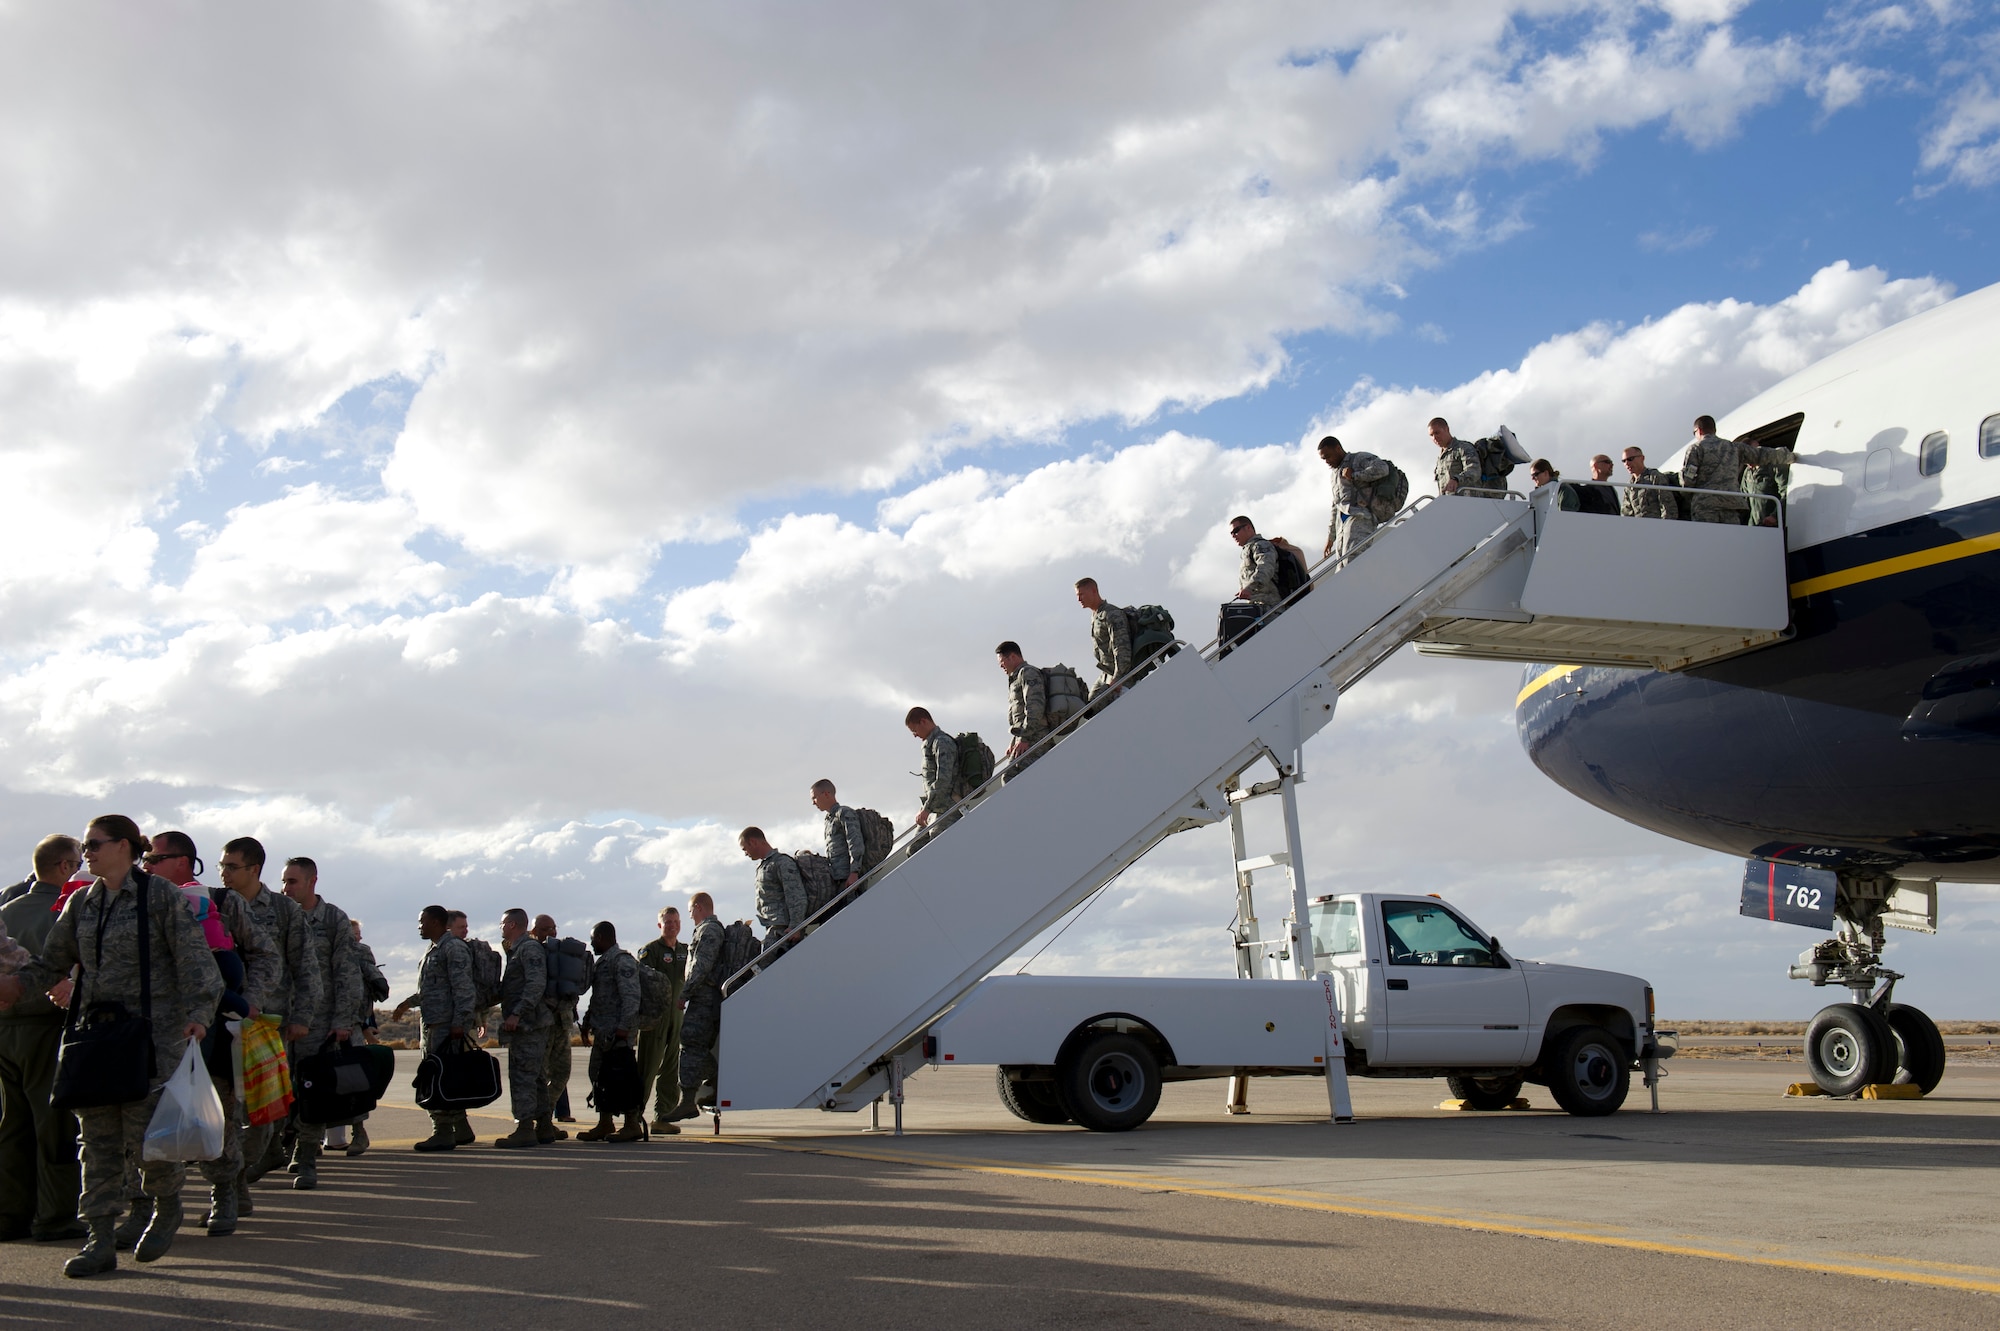 Airmen from the 7th Fighter Squadron and the 49th Maintenance Group deplane after landing at Holloman Air Force Base, N.M., Jan. 28. F-22 Raptors and around 200 personnel returned Monday from a 9-month deployment to Southwest Asia ensuring regional security and joint tactical air operations. (U.S. Air Force photo by Airman 1st Class Michael Shoemaker/Released)